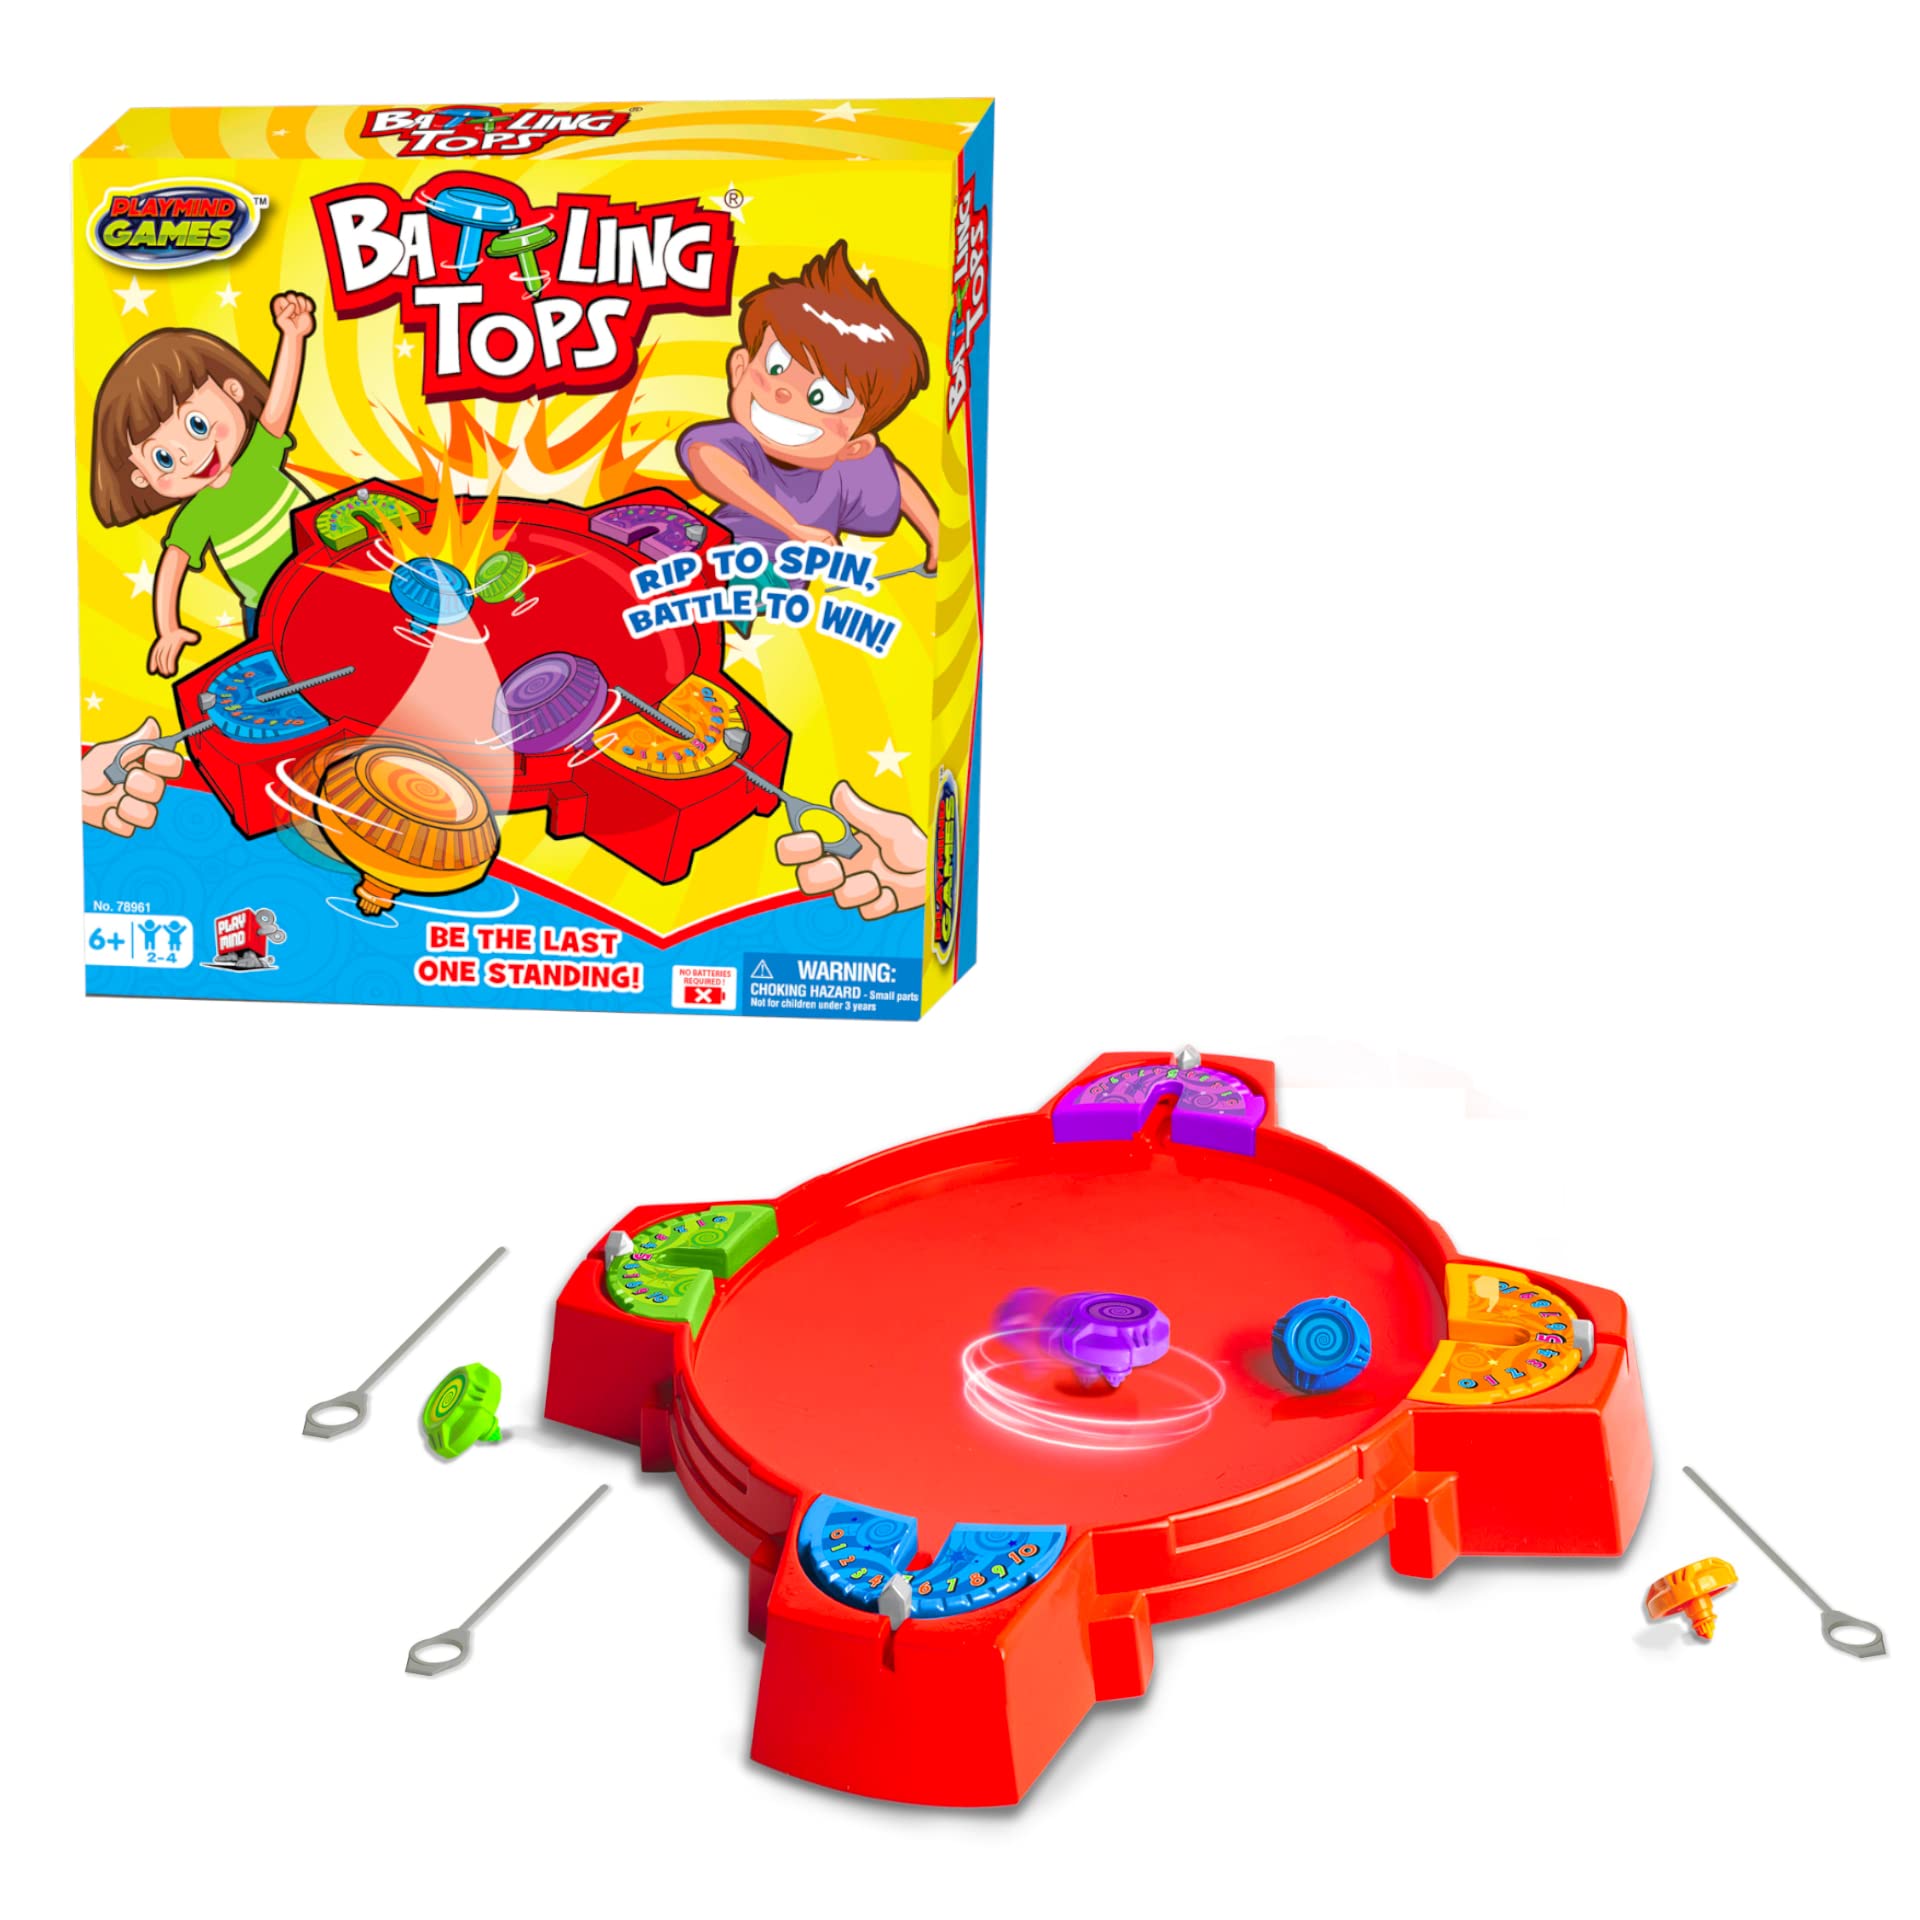 Playmind Battling Tops - The Original Classic Spinning Tops Game Set for 2-4 Kids. Insert, Press & Pull! Drop Battle Gyros in The Stadium to Combat with Each Other. Ages 6+ Boys & Girls